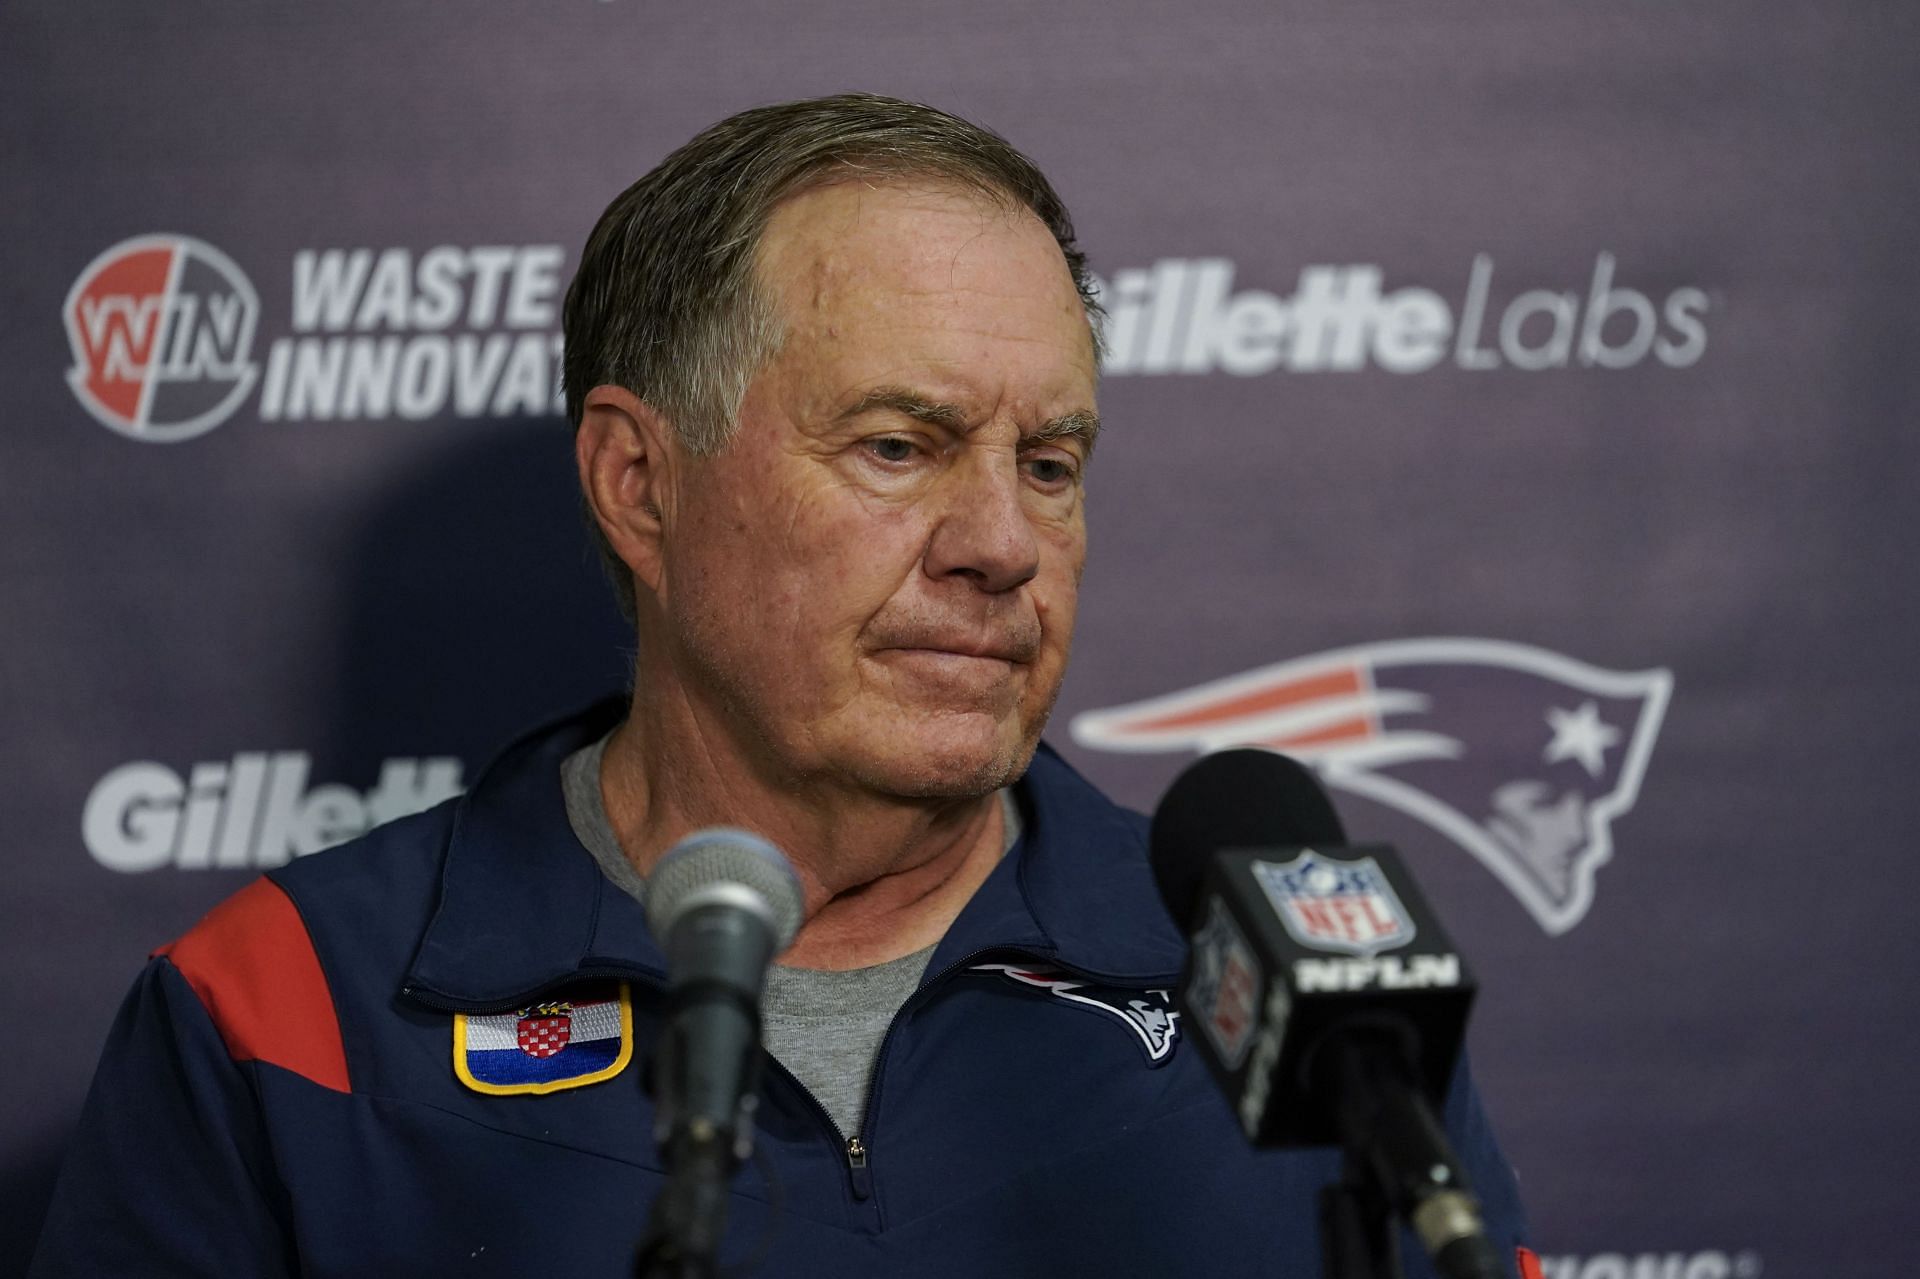 Patriots Dolphins Football: New England Patriots head coach Bill Belichick speaks during a news conference following an NFL football game against the Miami Dolphins on Sunday, Oct. 29, 2023, in Miami Gardens, Fla. (AP Photo/Lynne Sladky)